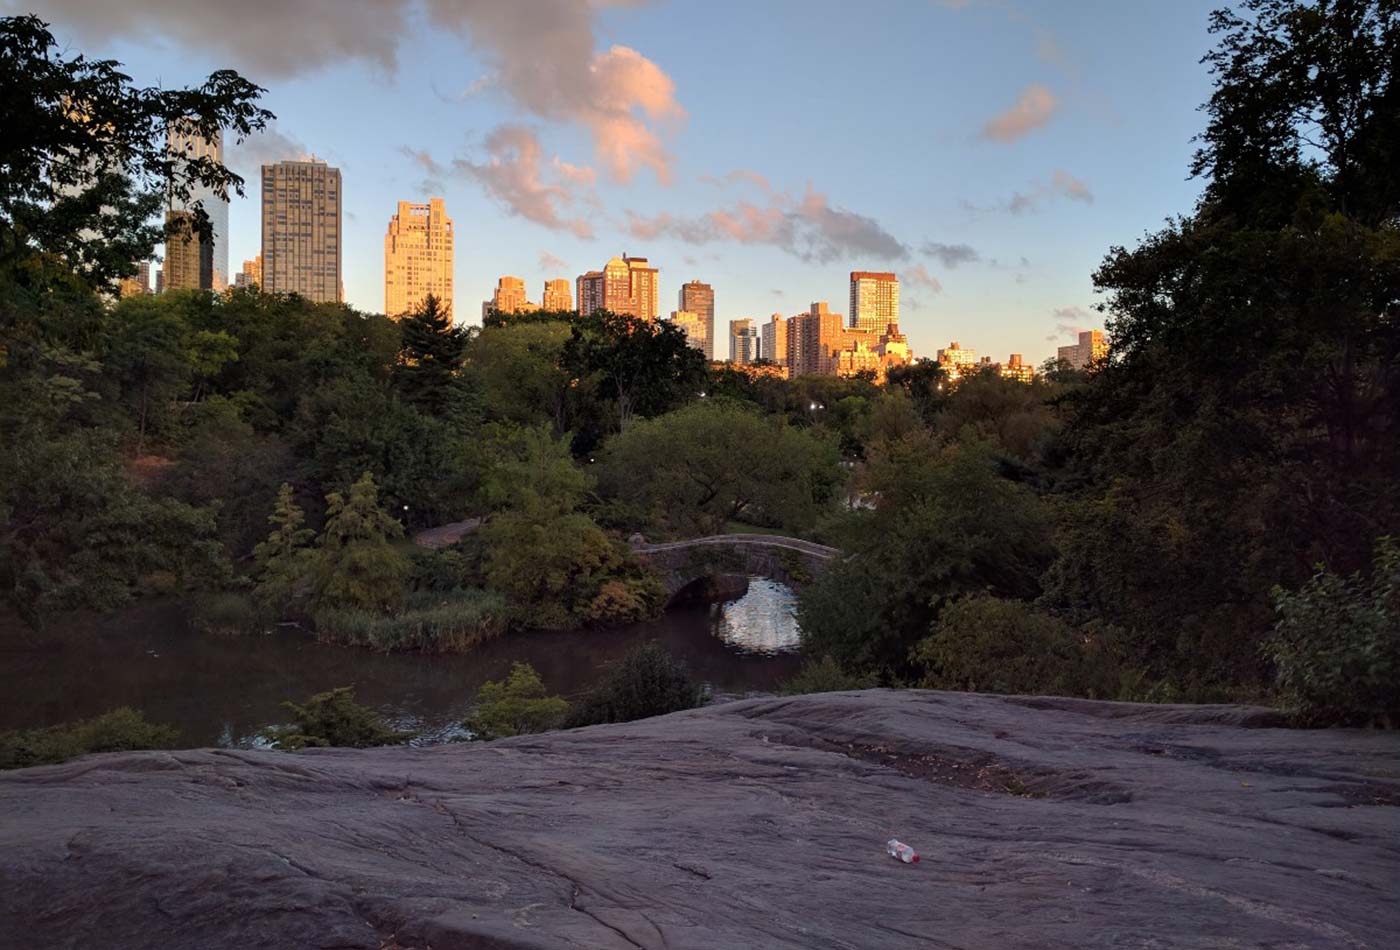 Sunrise over central park, with abandoned water bottle.